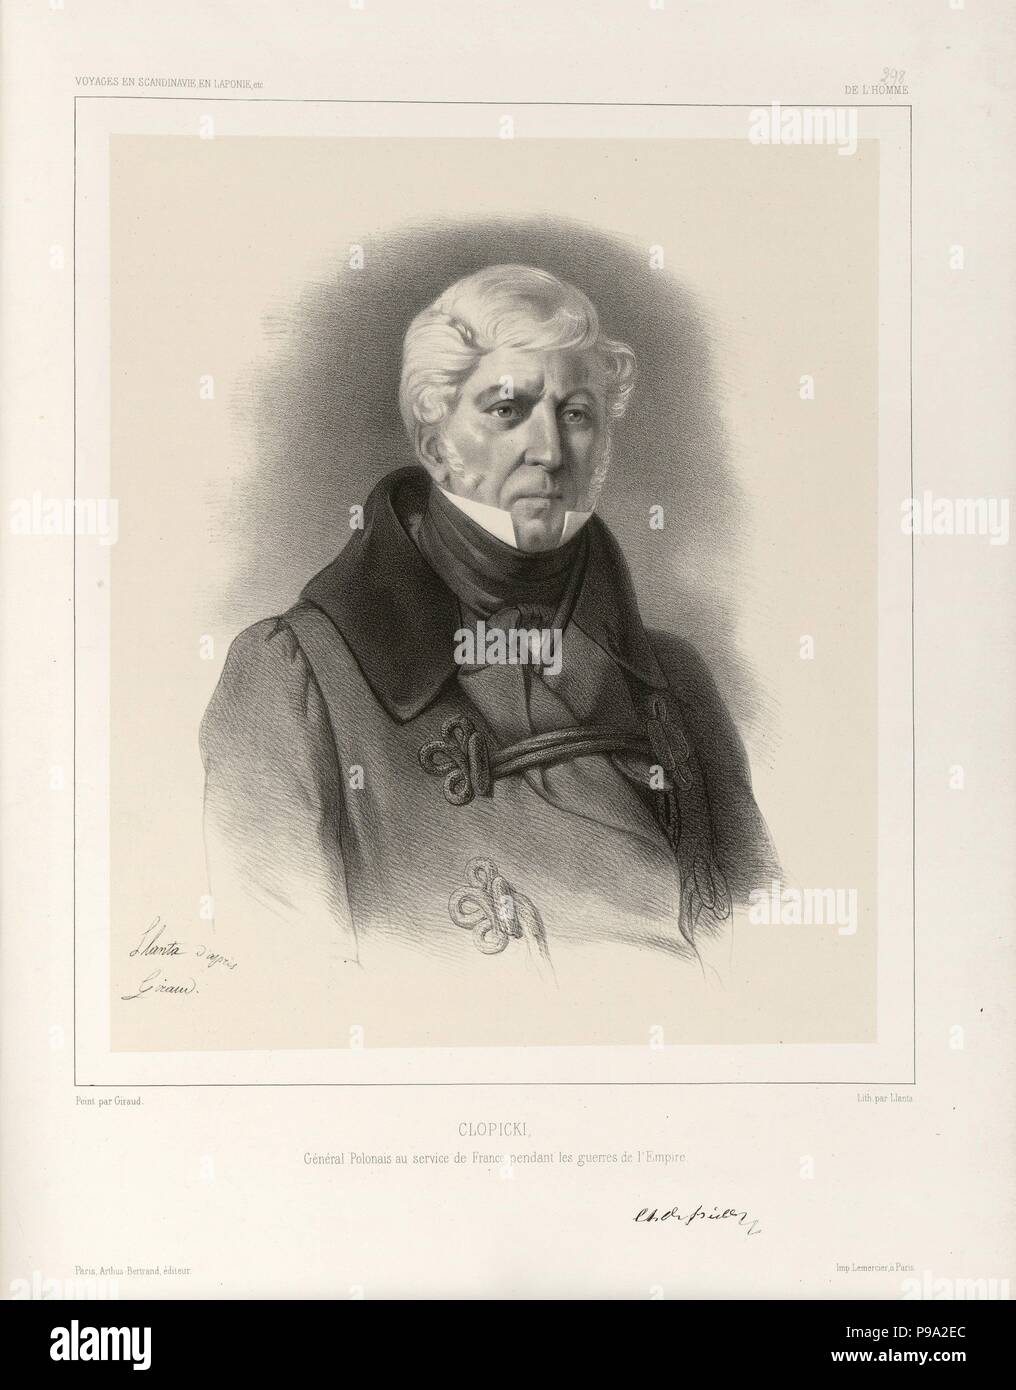 Portrait of General Jozef Chlopicki (1771-1854). Museum: National Library of Norway, Oslo. Stock Photo